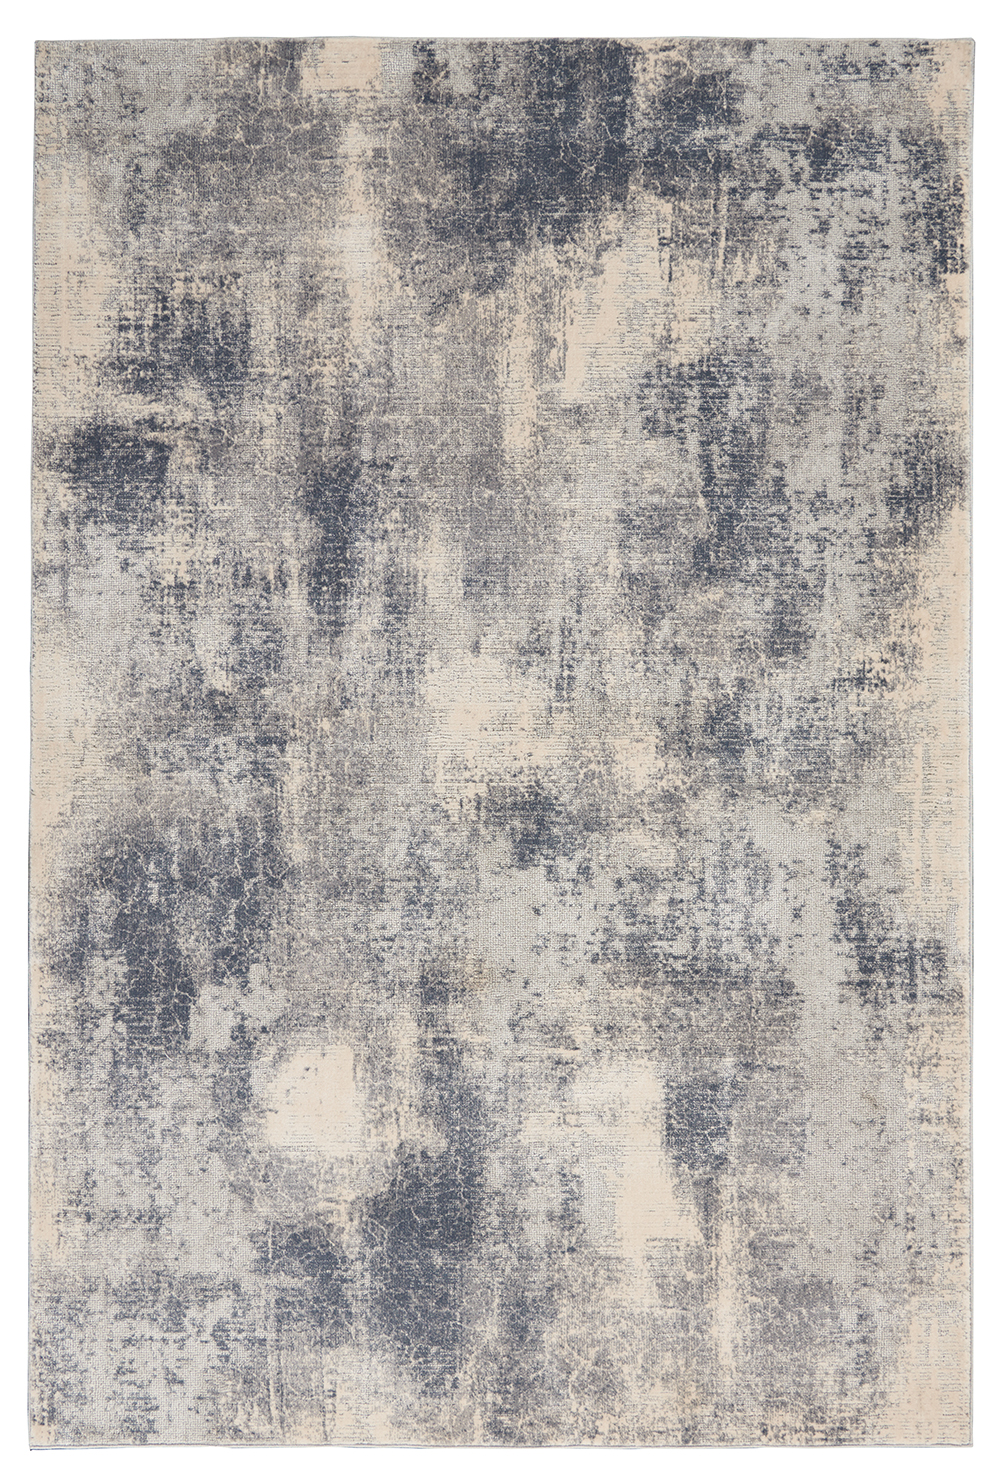 Nourison Rugs - Rustic Textures Rectanglular RUS02 Rug in Blue / Ivory - 2.2m x 1.6m